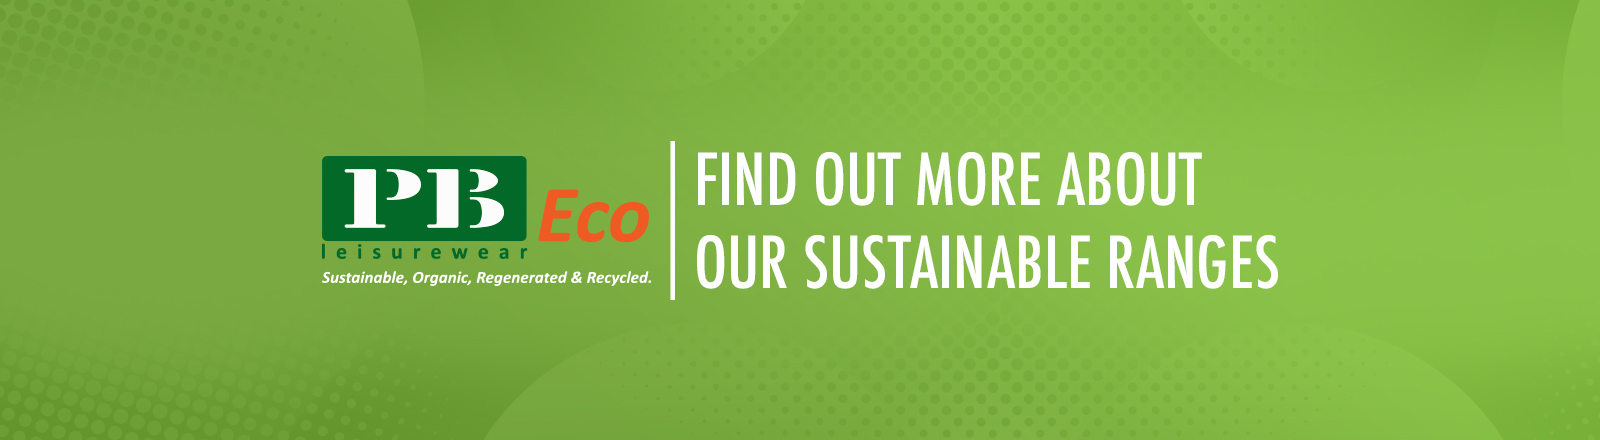 find out more about our sustainable ranges